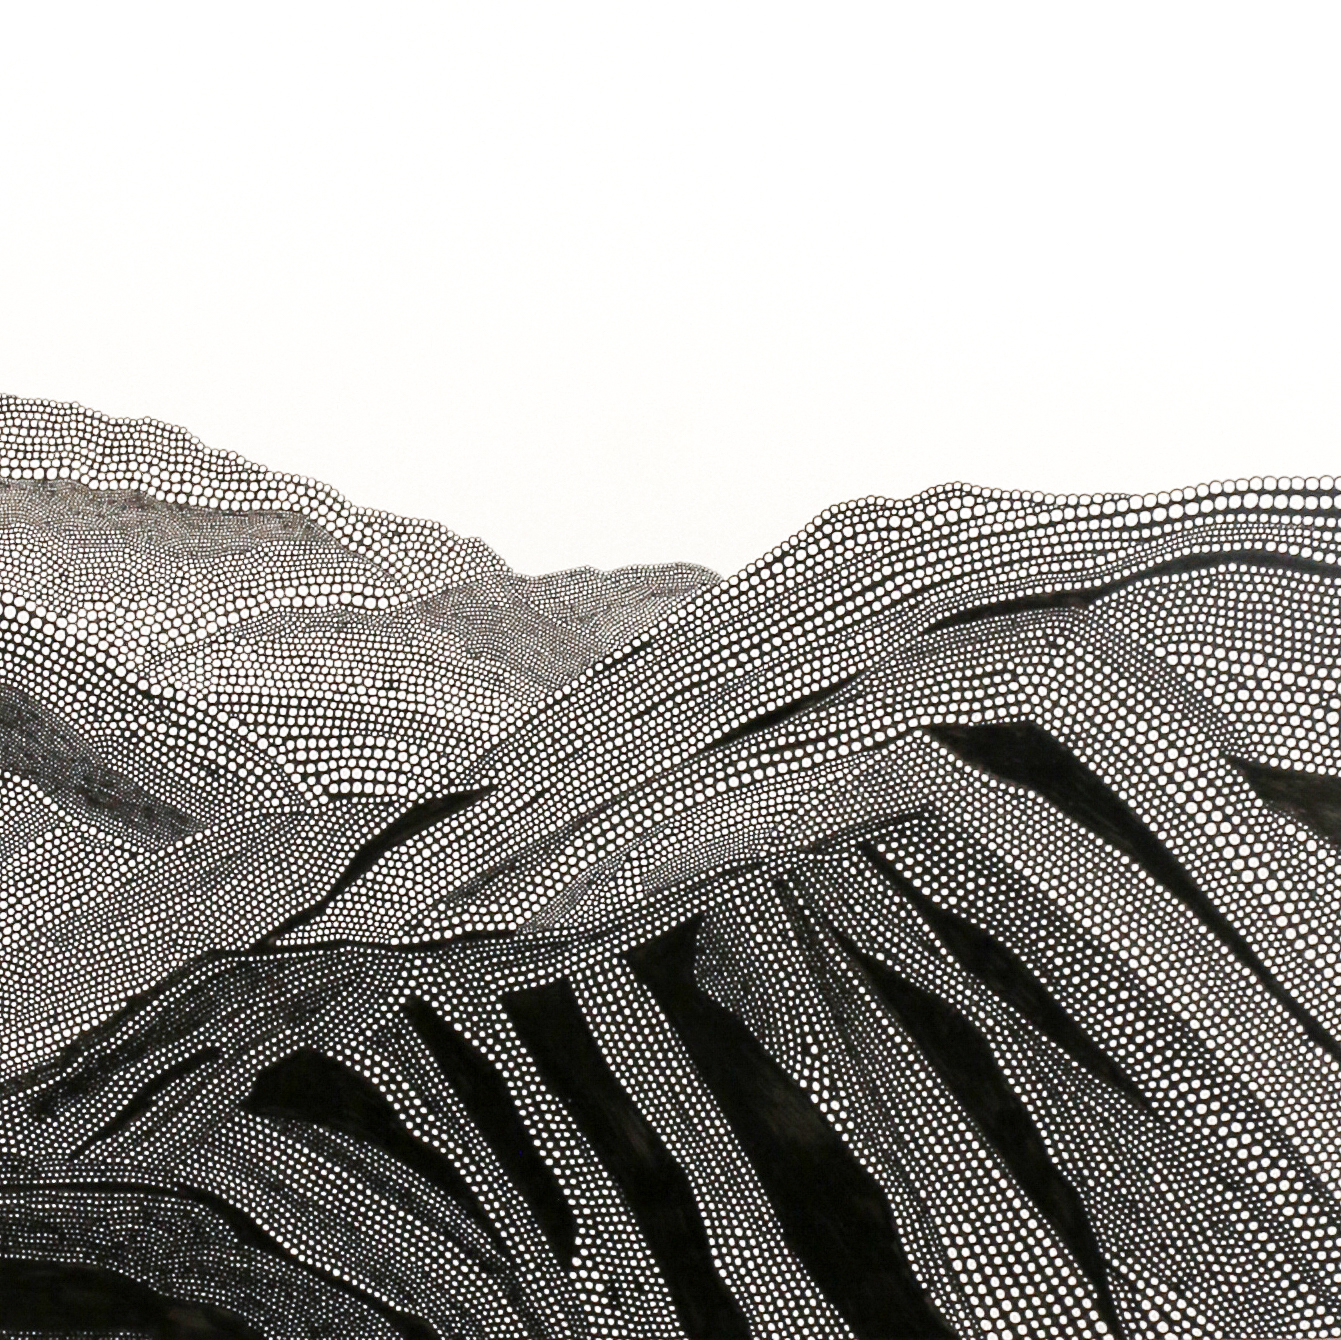 9. Mountains in 2022_05, Pen on Panel_Hyewoon Yoon - Copy